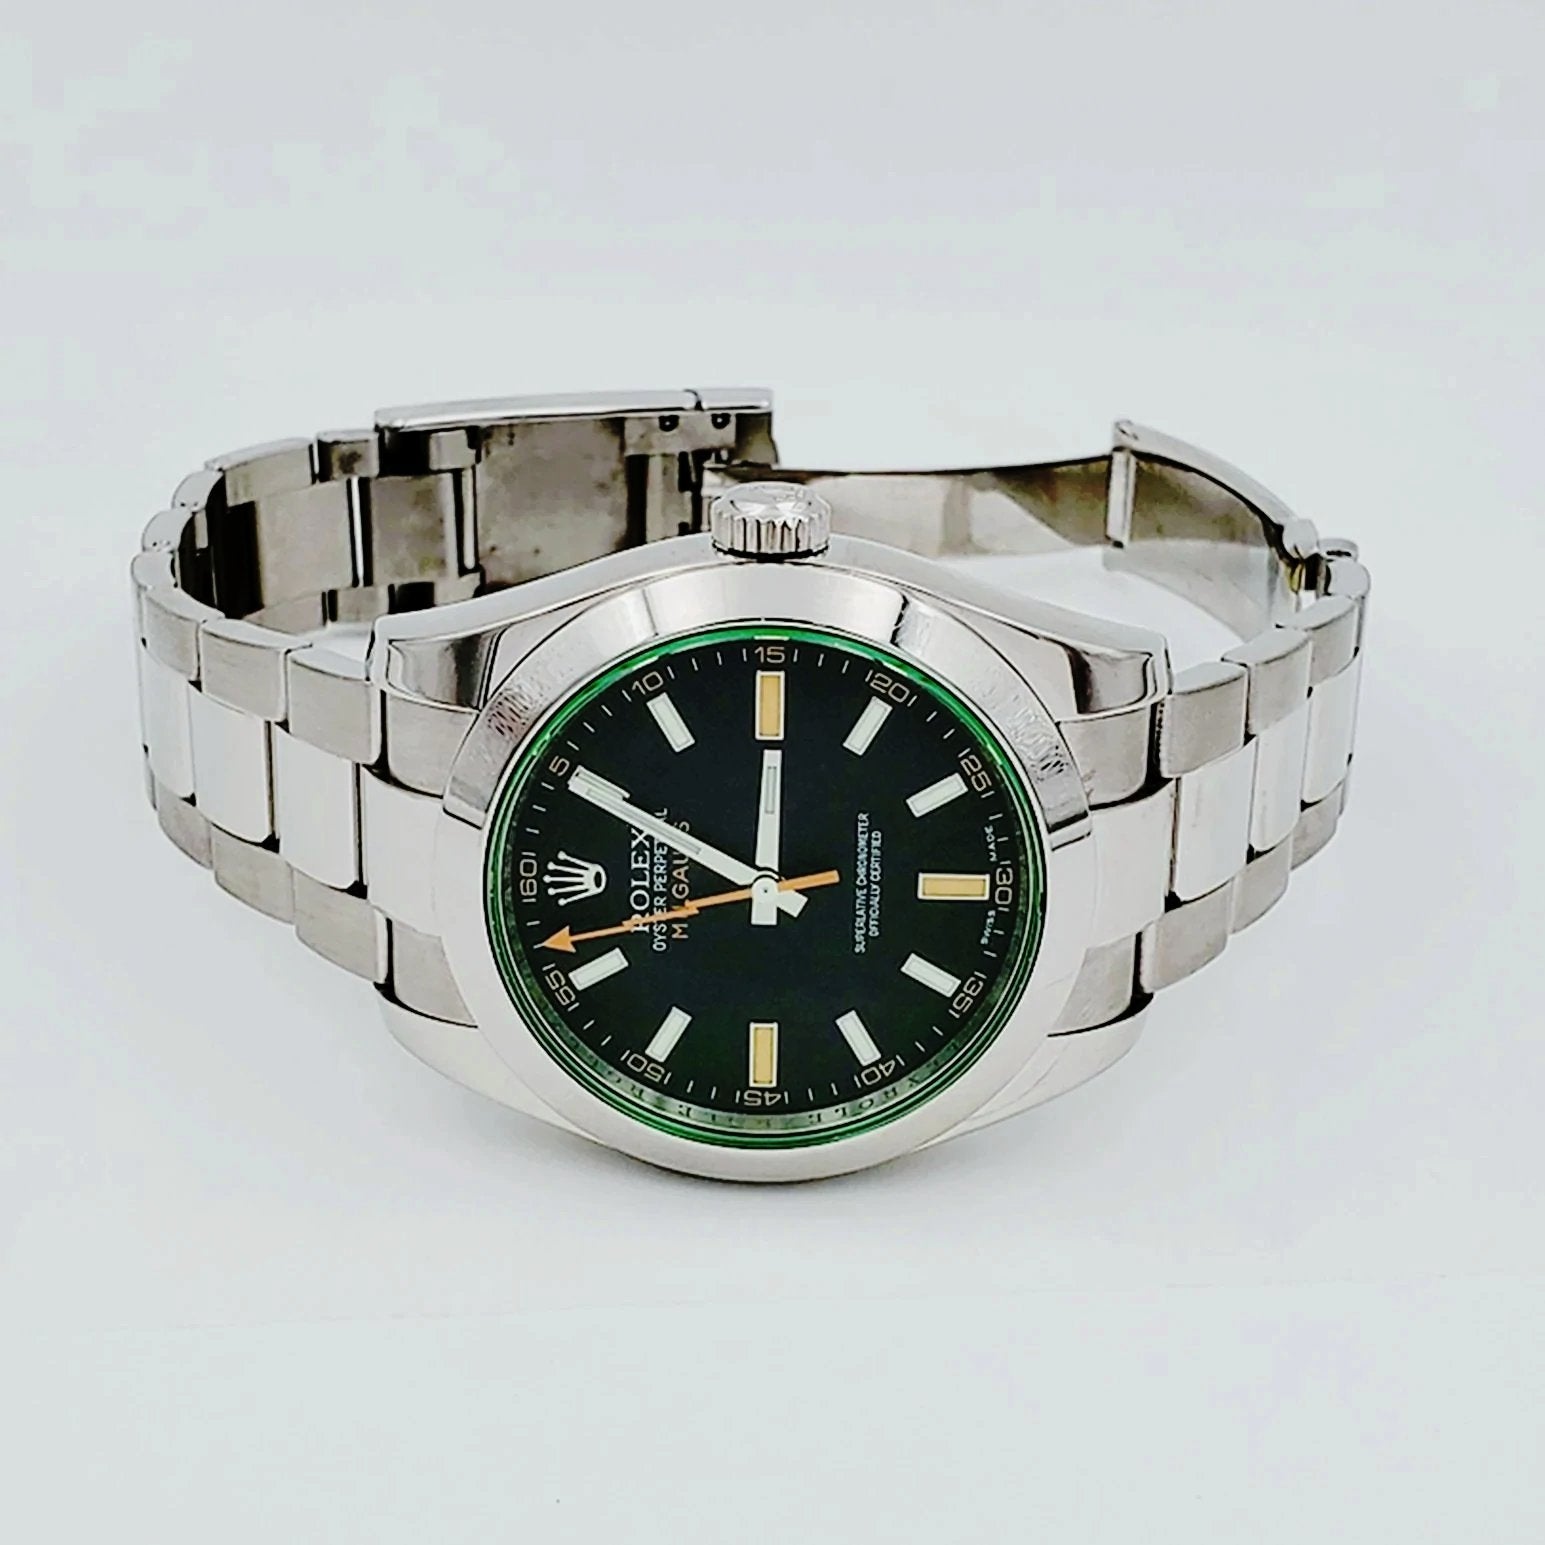 Men's Rolex 40mm Milgauss Oyster Perpetual Stainless Steel Watch with Green Dial and Smooth Bezel. (Pre-Owned 116400GV)